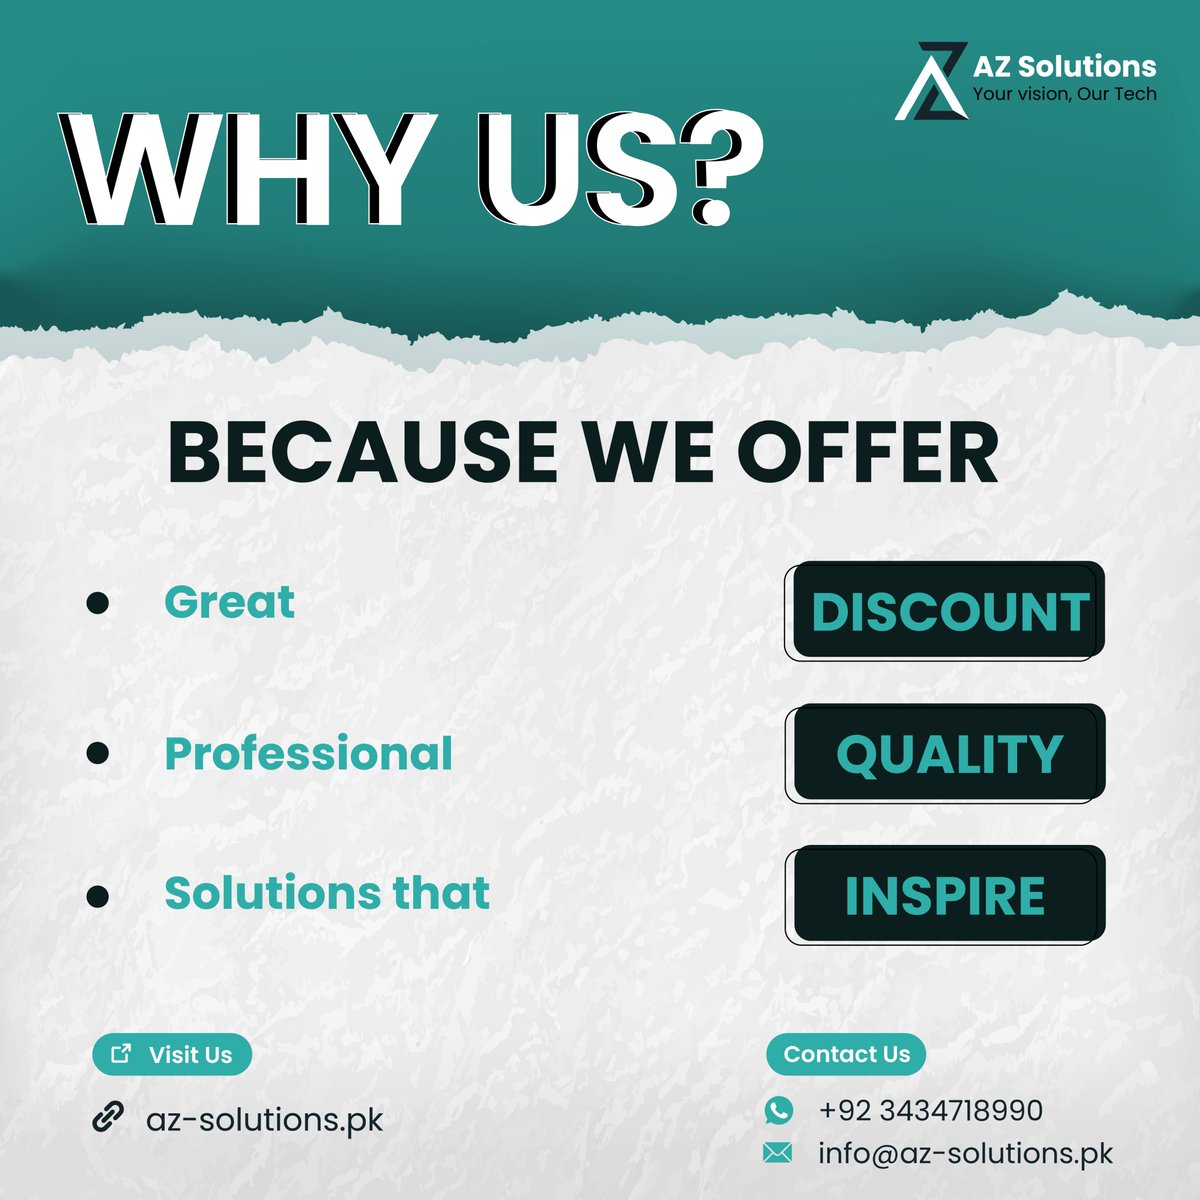 Experience with our exclusive discounts on high-quality solutions, exceed expectations, and guarantee your satisfaction.

#azsolutions #inspiresuccess #experiencematters #ExclusiveDiscounts #highqualitysolutions #satisfy